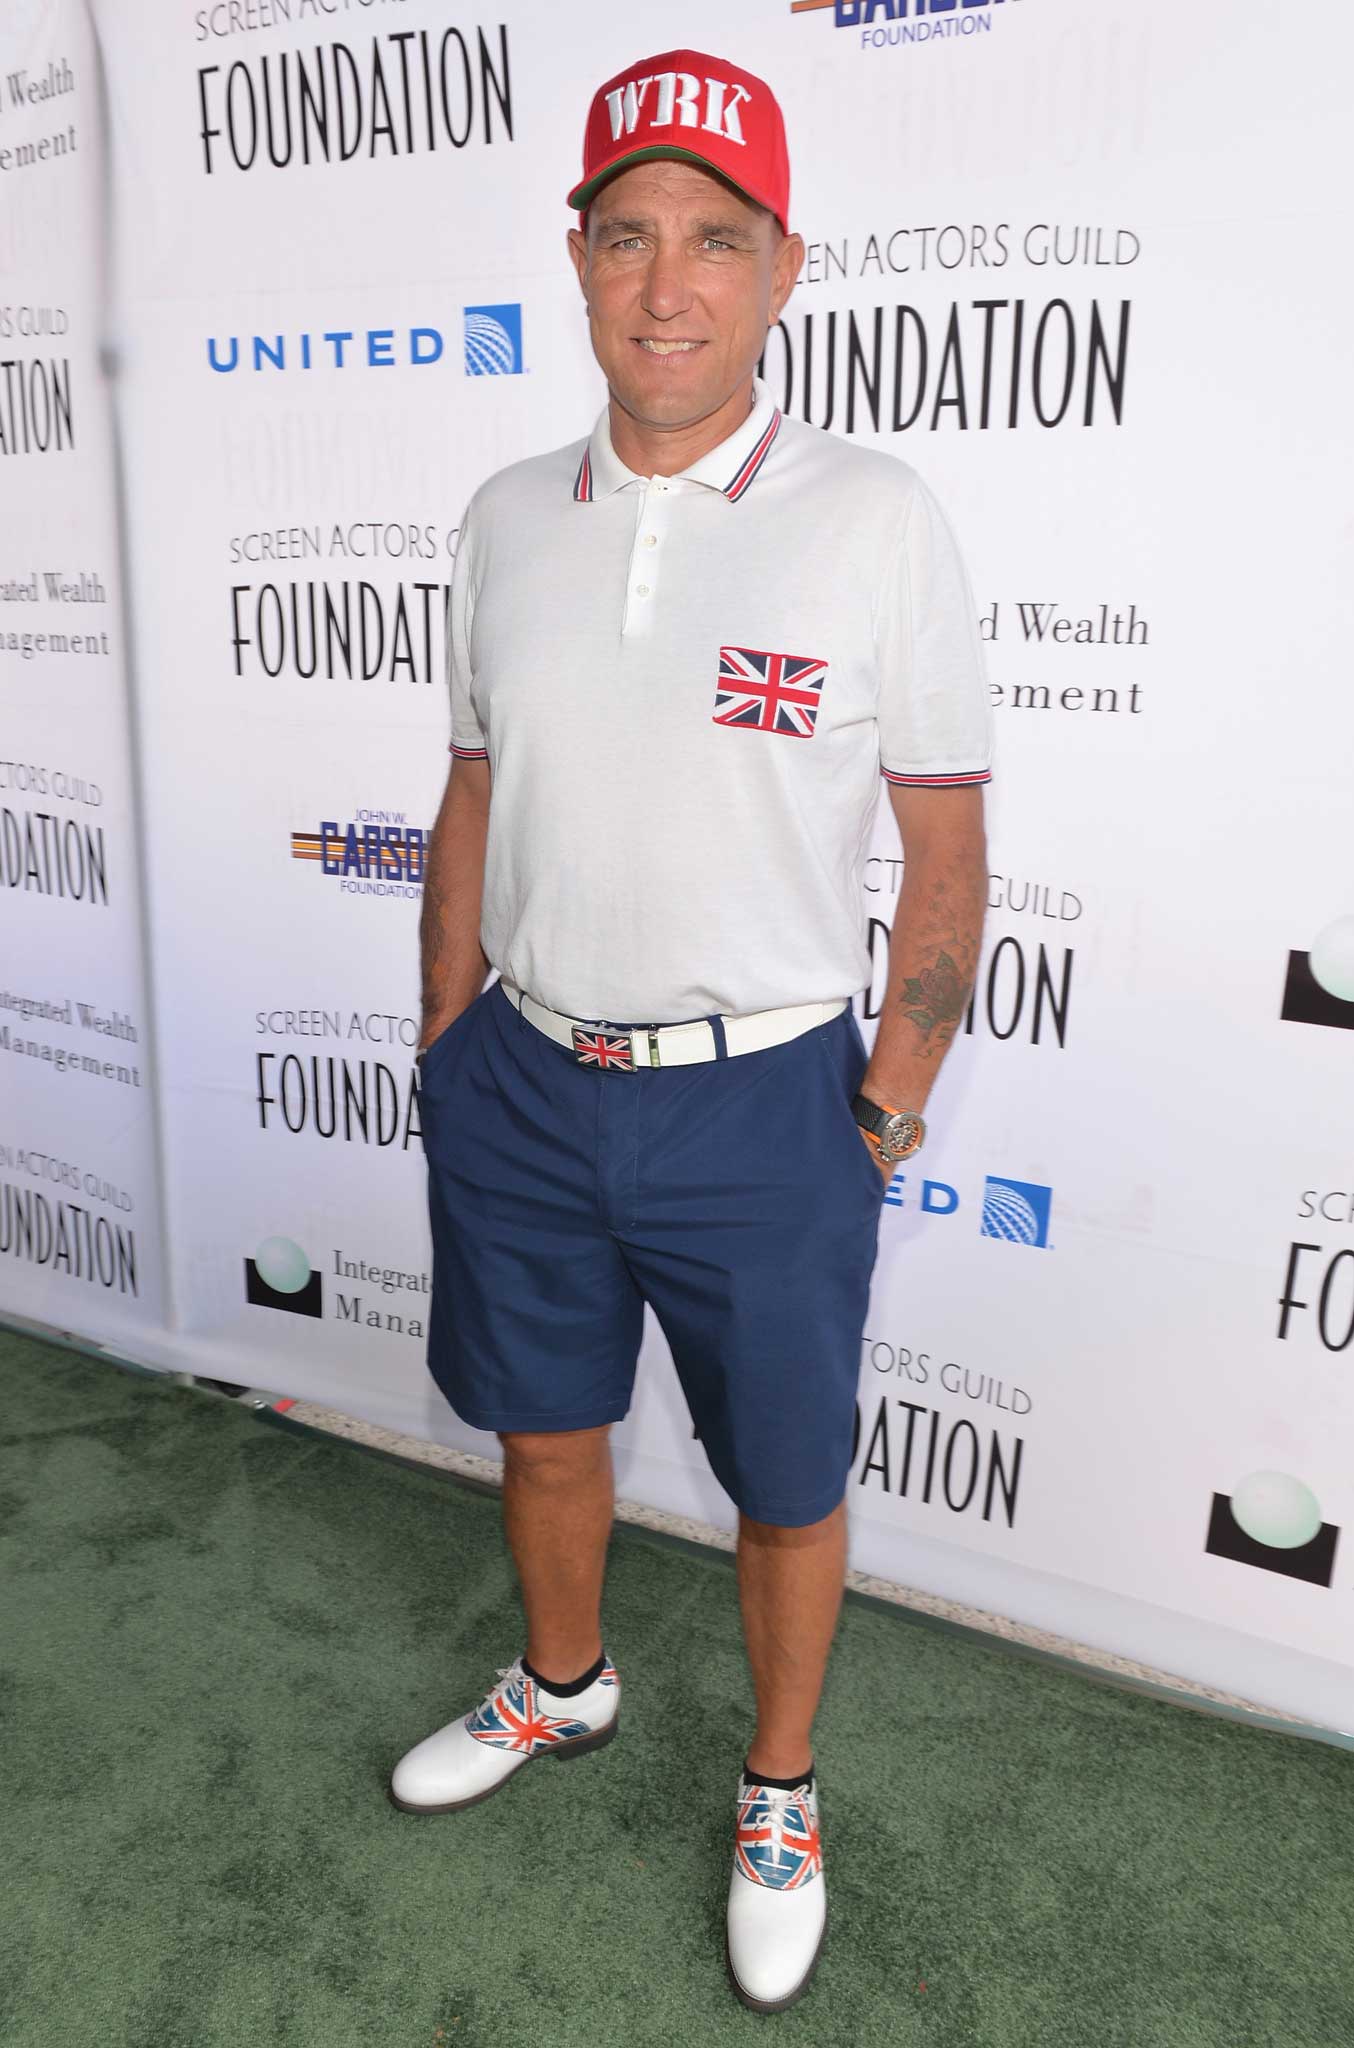 Jack the lad: Vinnie Jones at the 'Actors Fore Actors' event in Los Angeles